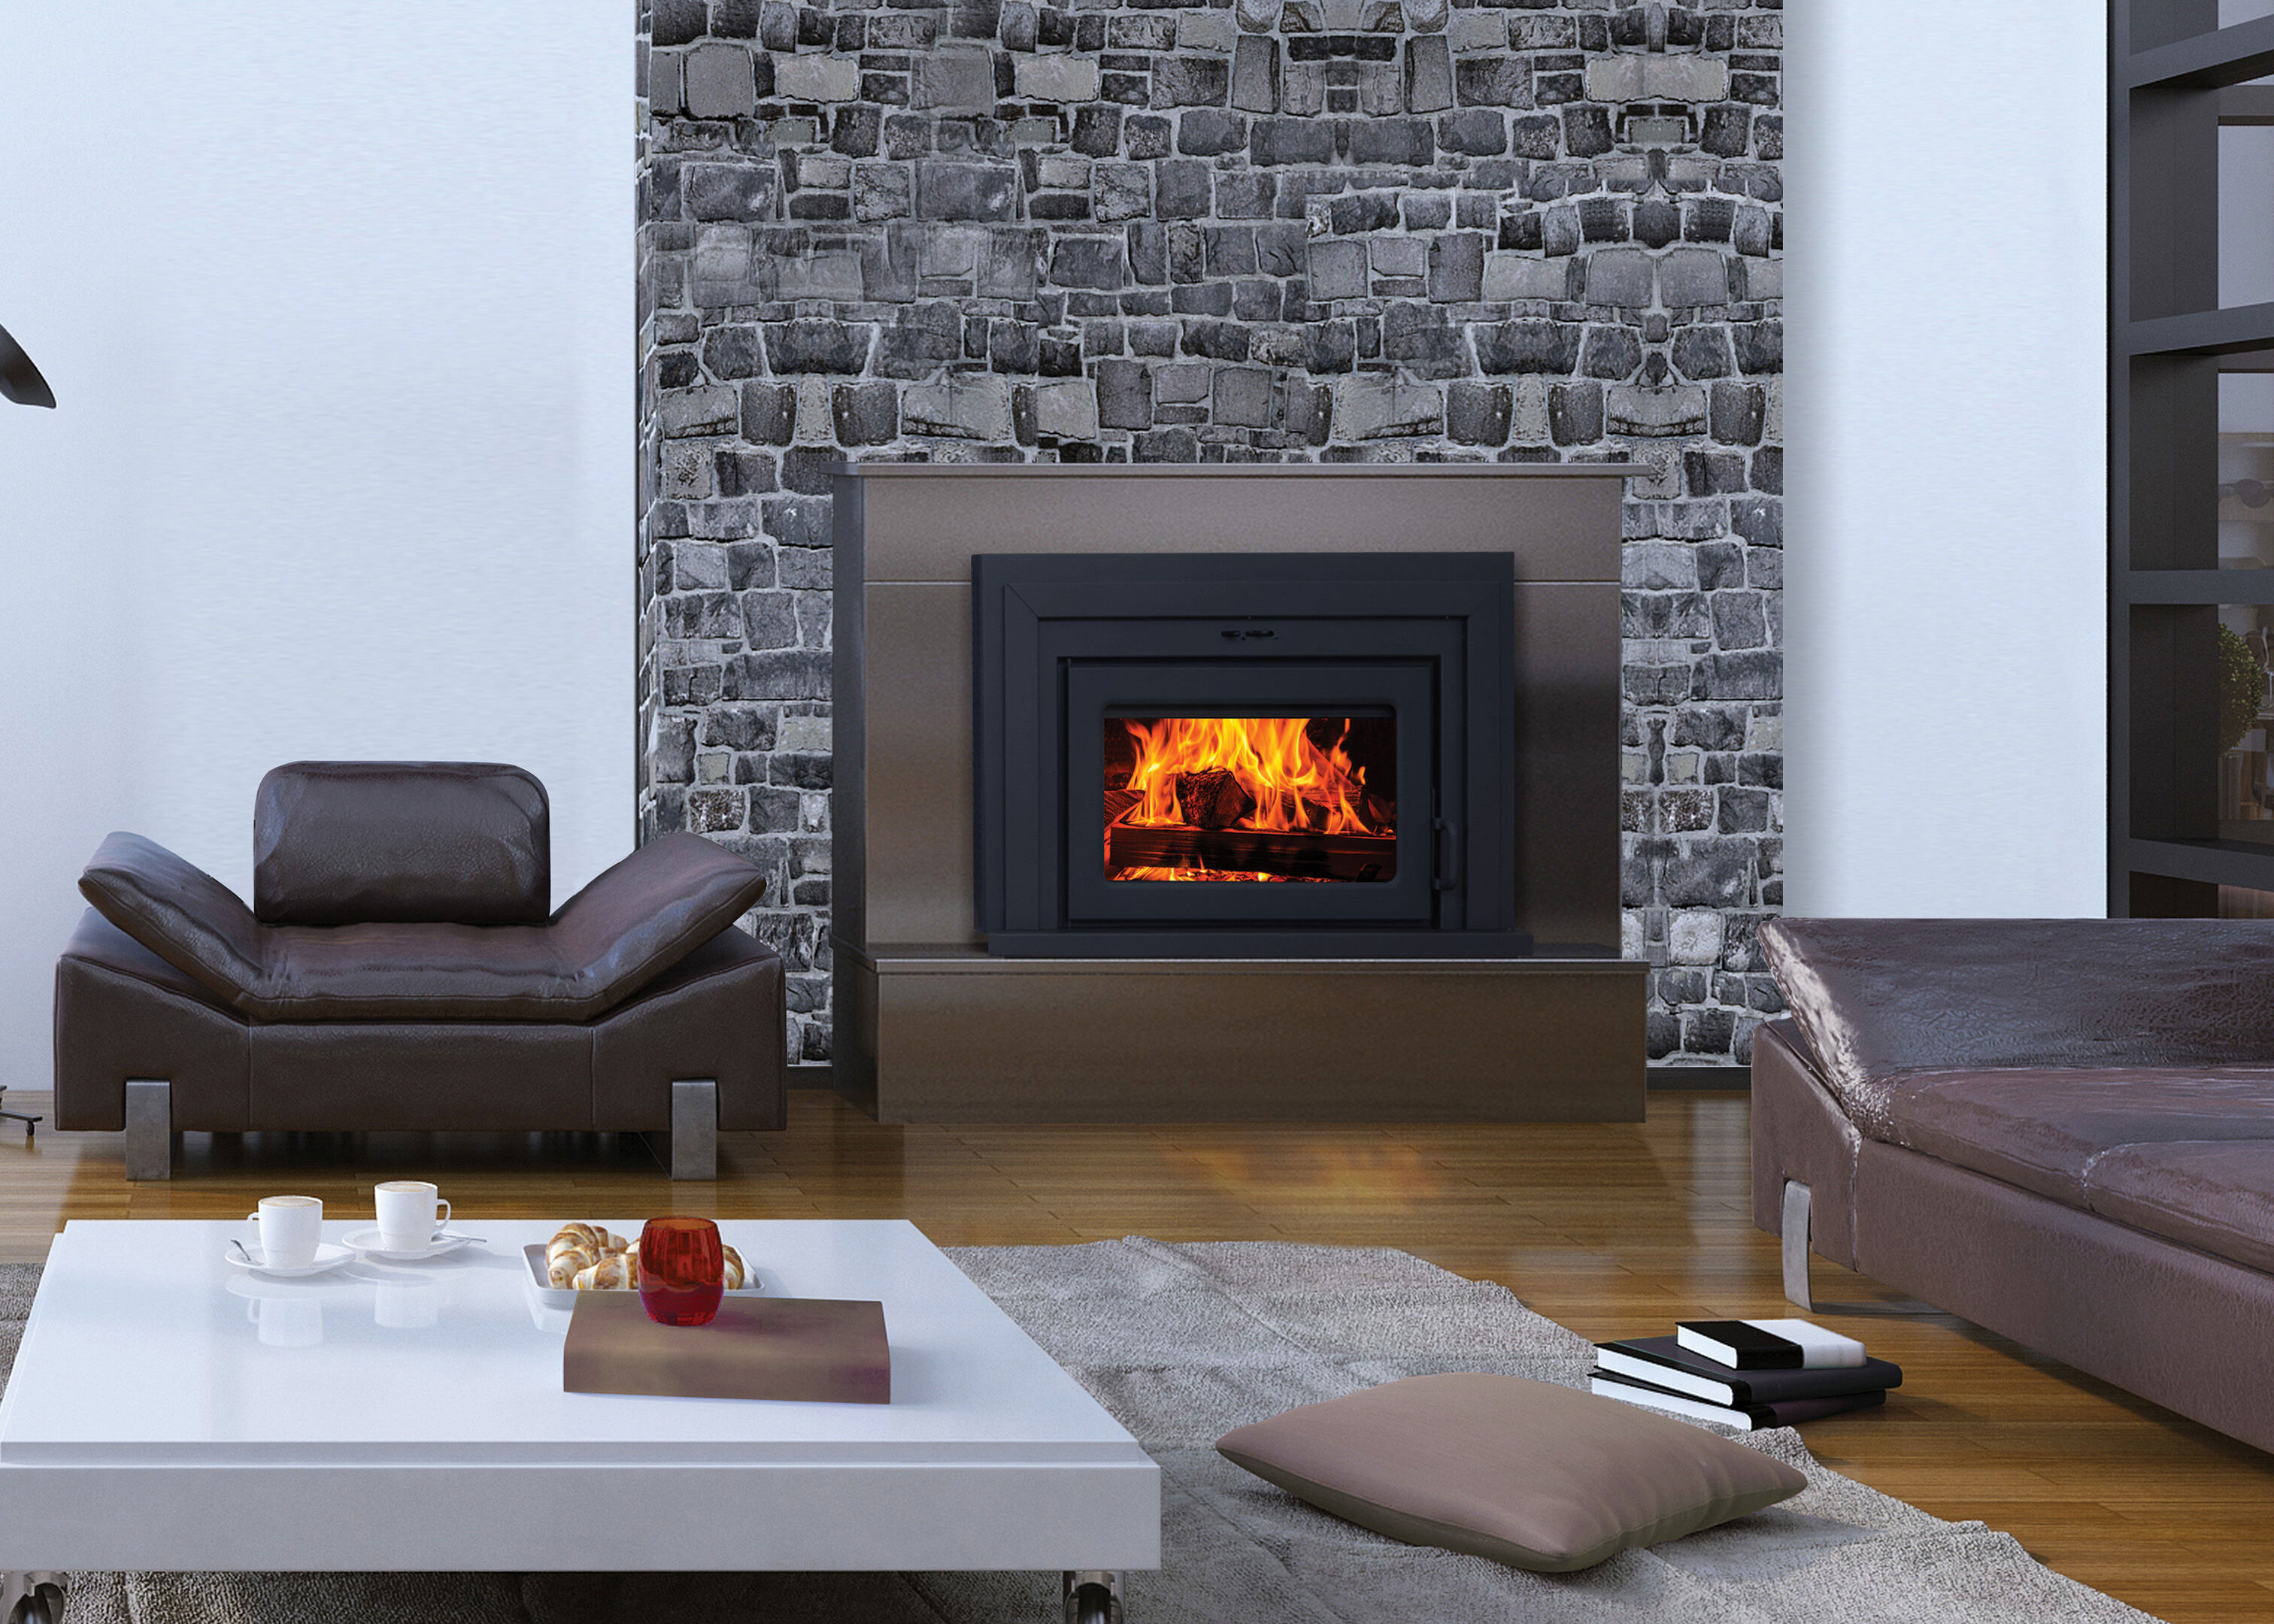 What Is A Fireplace Insert, Fireplace Insert Surround Insulation